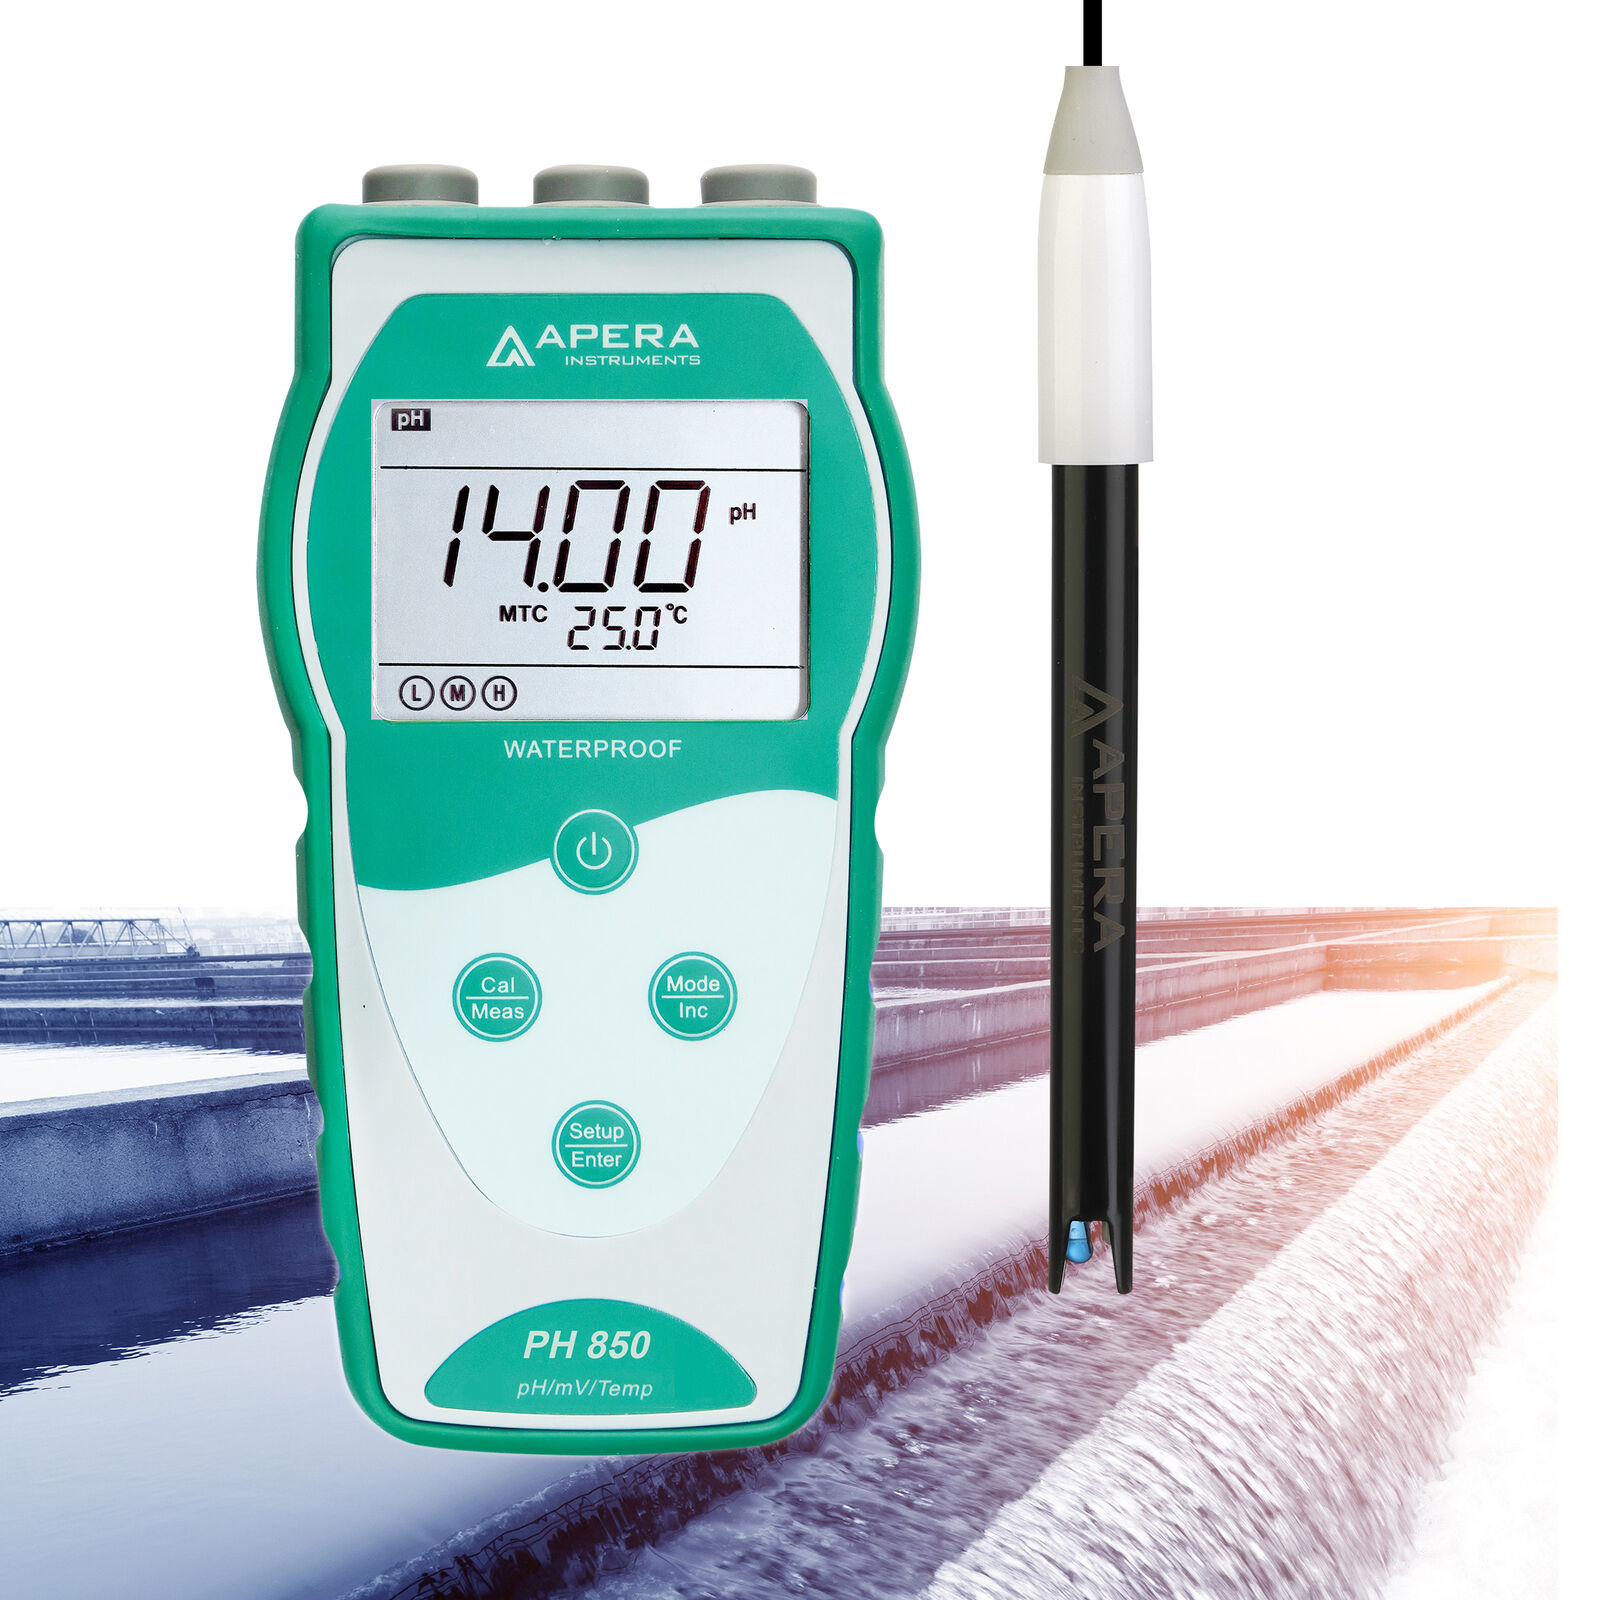 Apera PH850-WW Portable pH Meter for Wastewater Treatment (LabSen 333 Electrode)